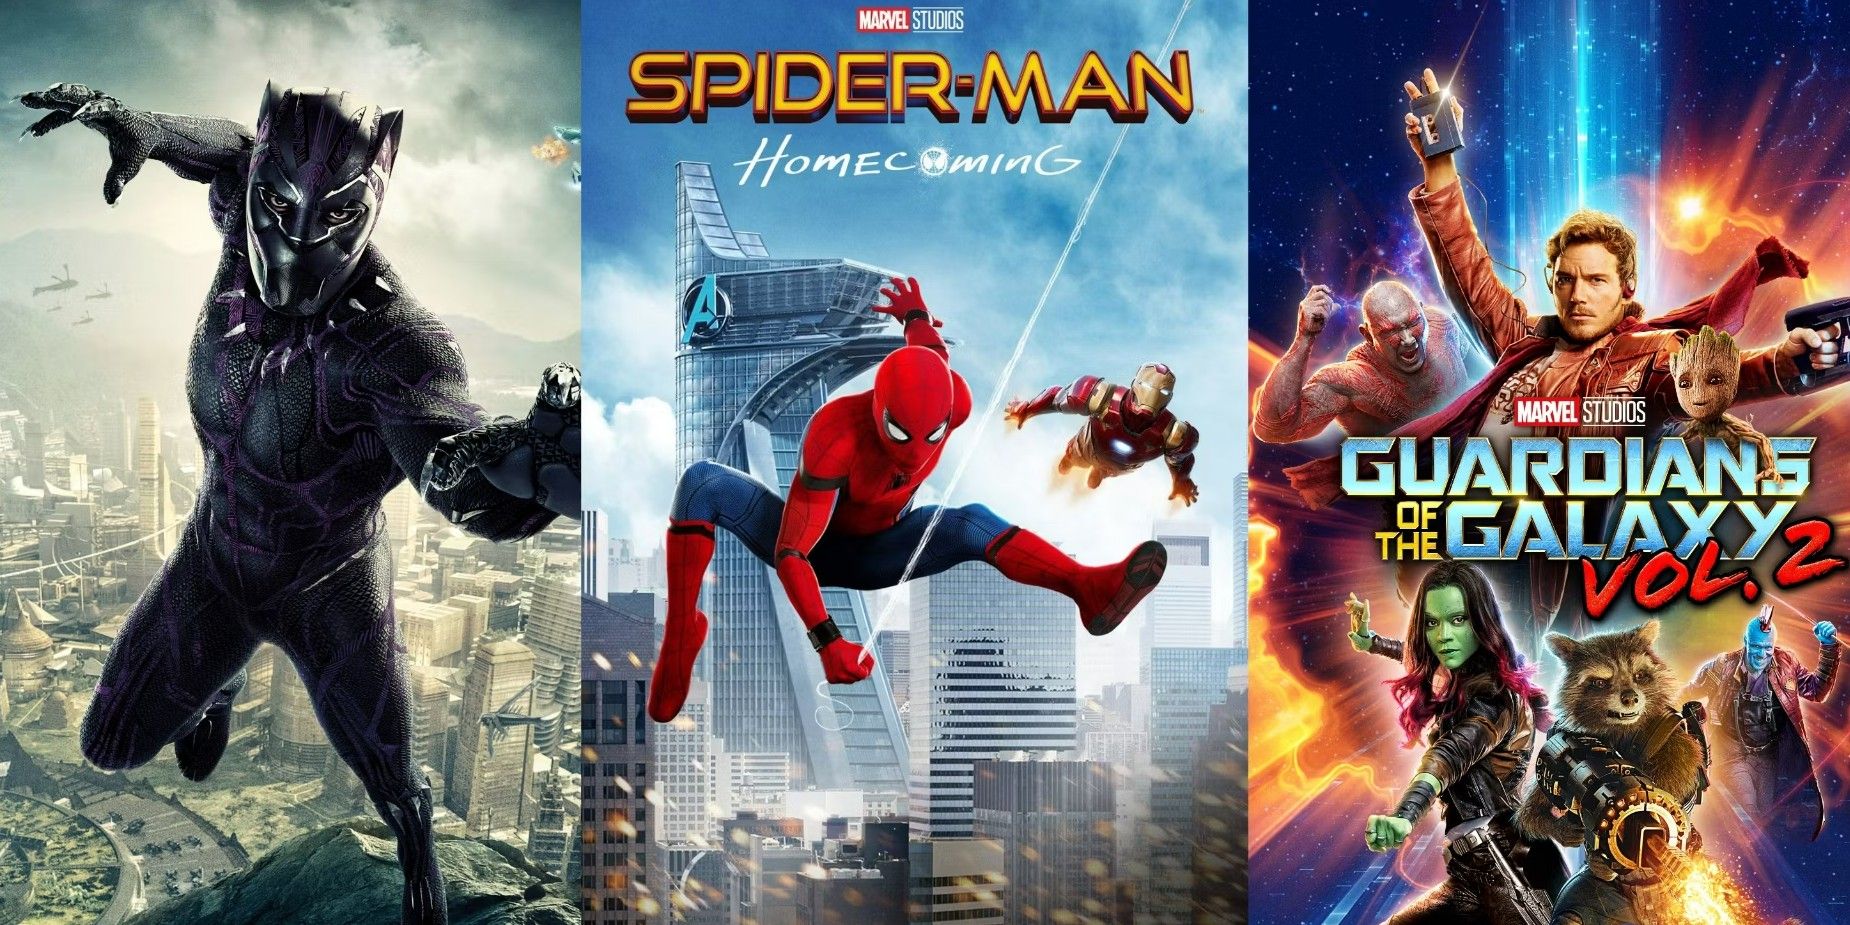 A split image of MCU Phase 3 movies: Black Panther, Spider-Man: Homecoming, and Guardians of the Galaxy Vol. 2 posters